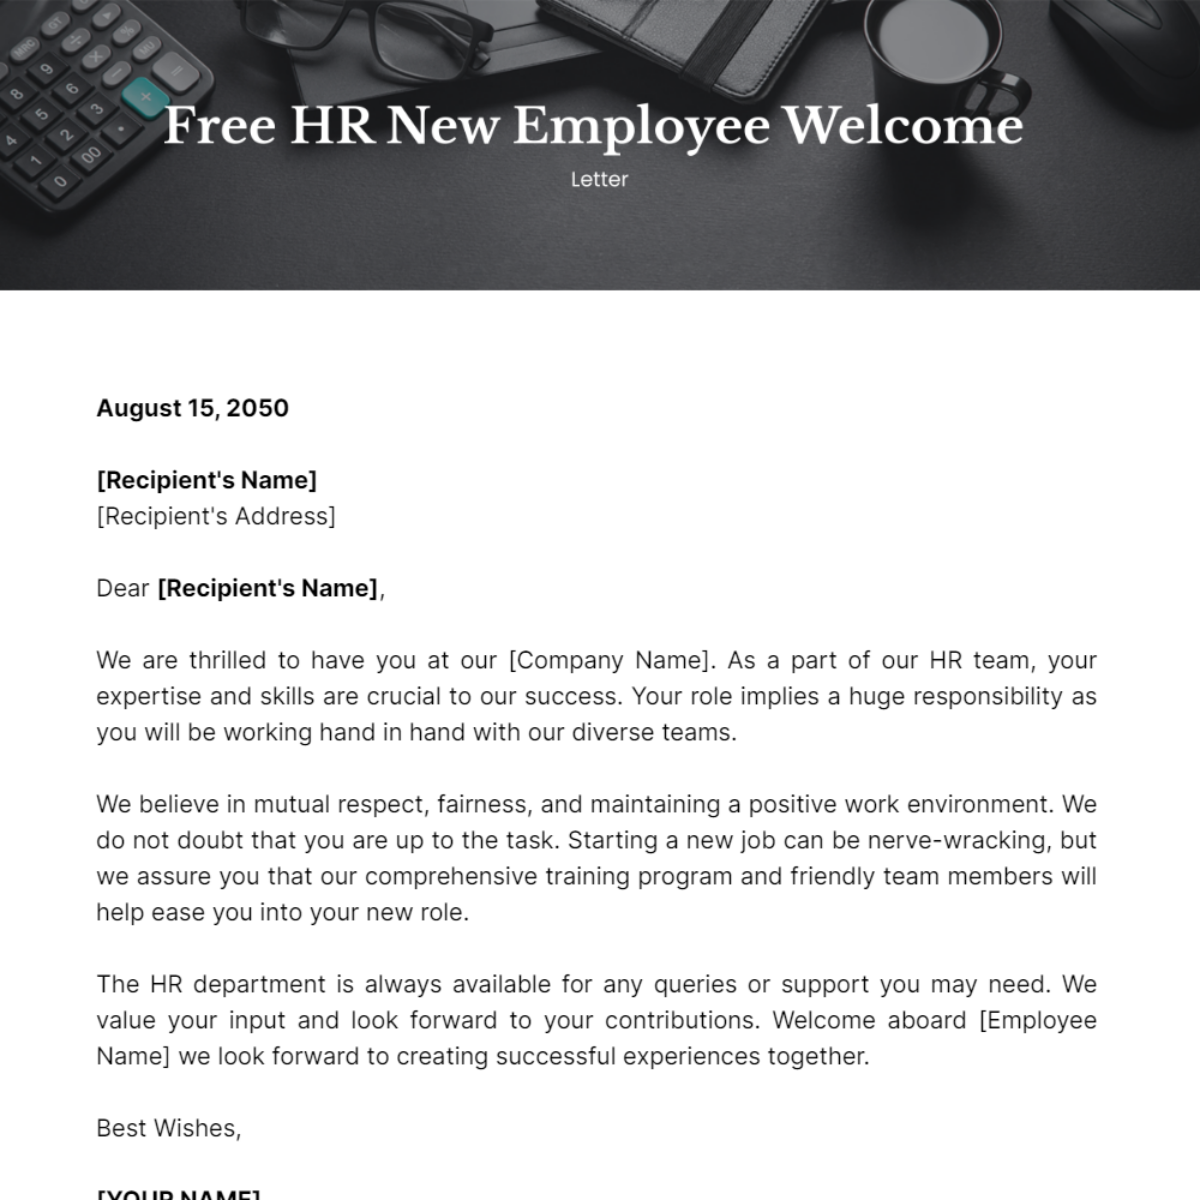 HR New Employee Welcome Letter Template